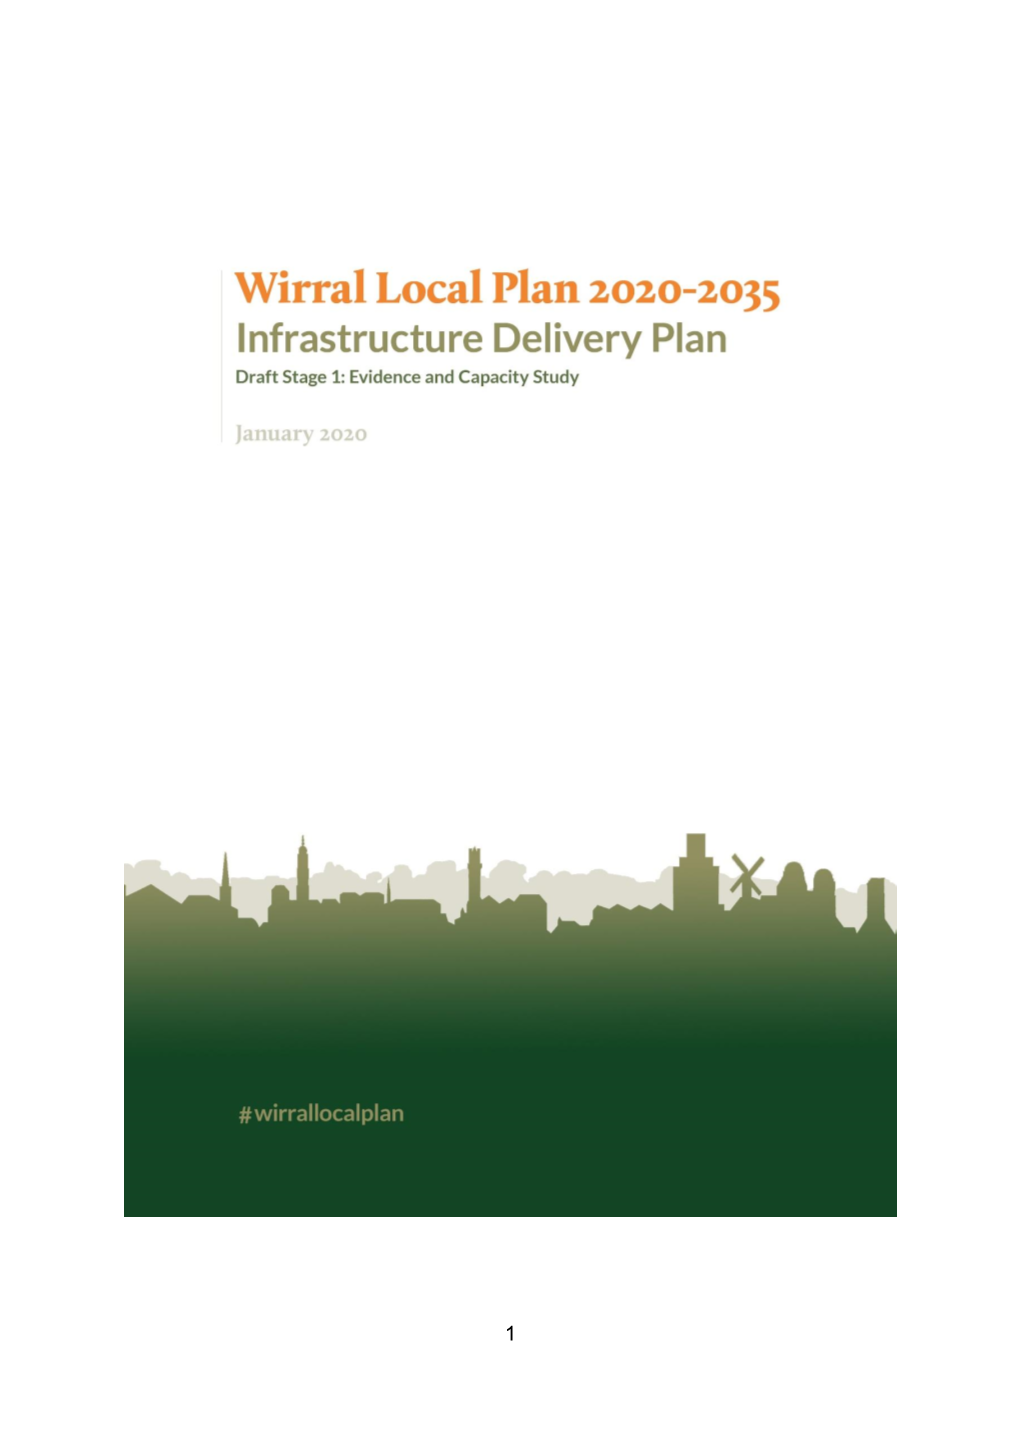 Wirral Infrastructure Delivery Plan Baseline Report 2019